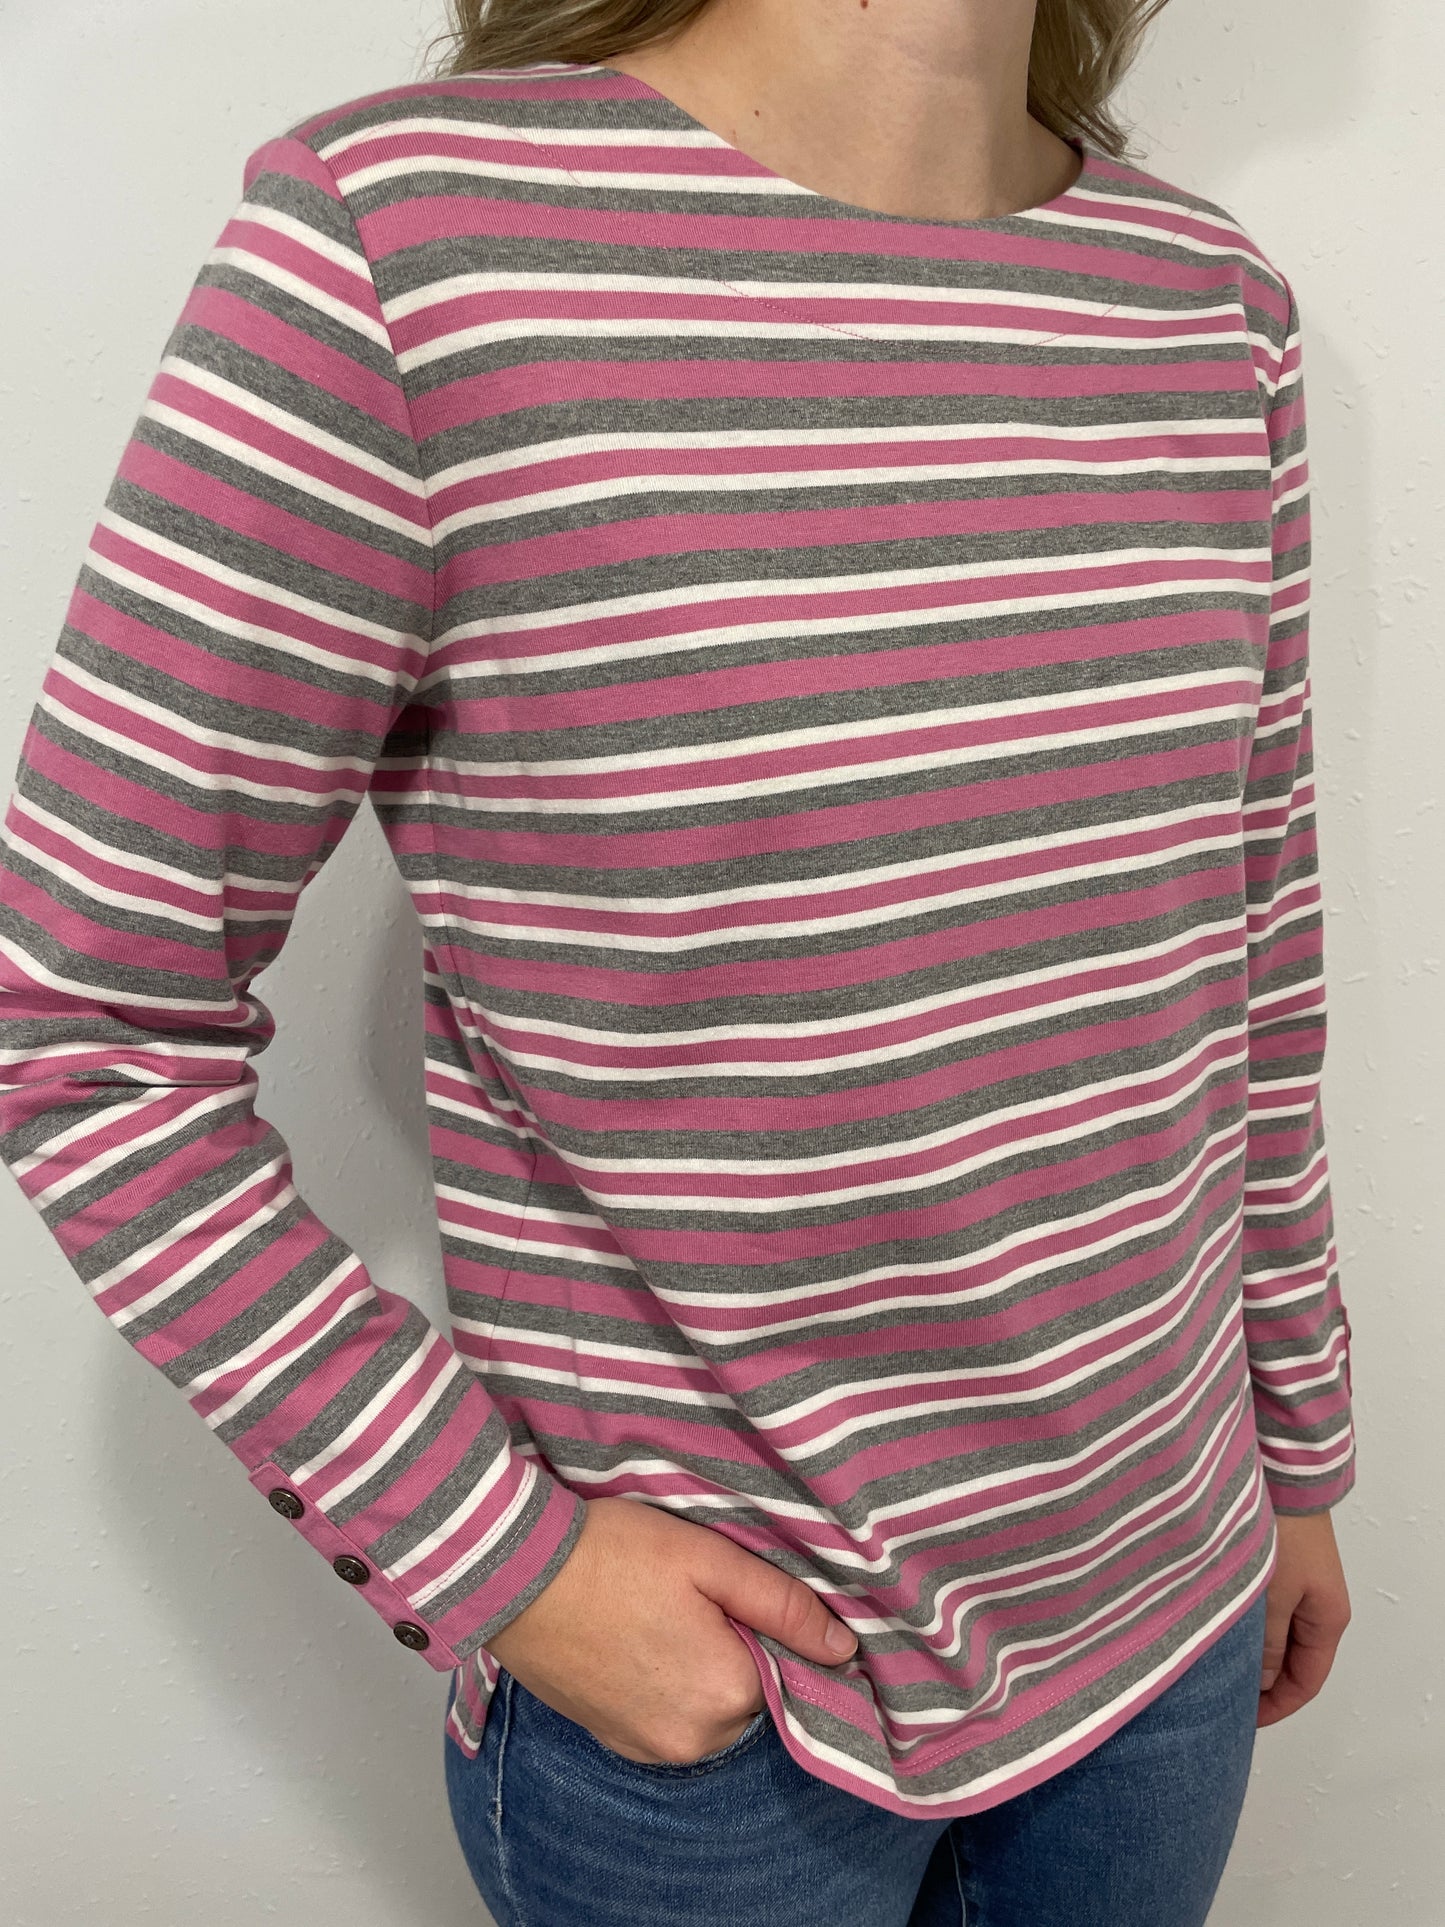 STRIPED BOAT NECK TOP - GREY/PINK/WHITE